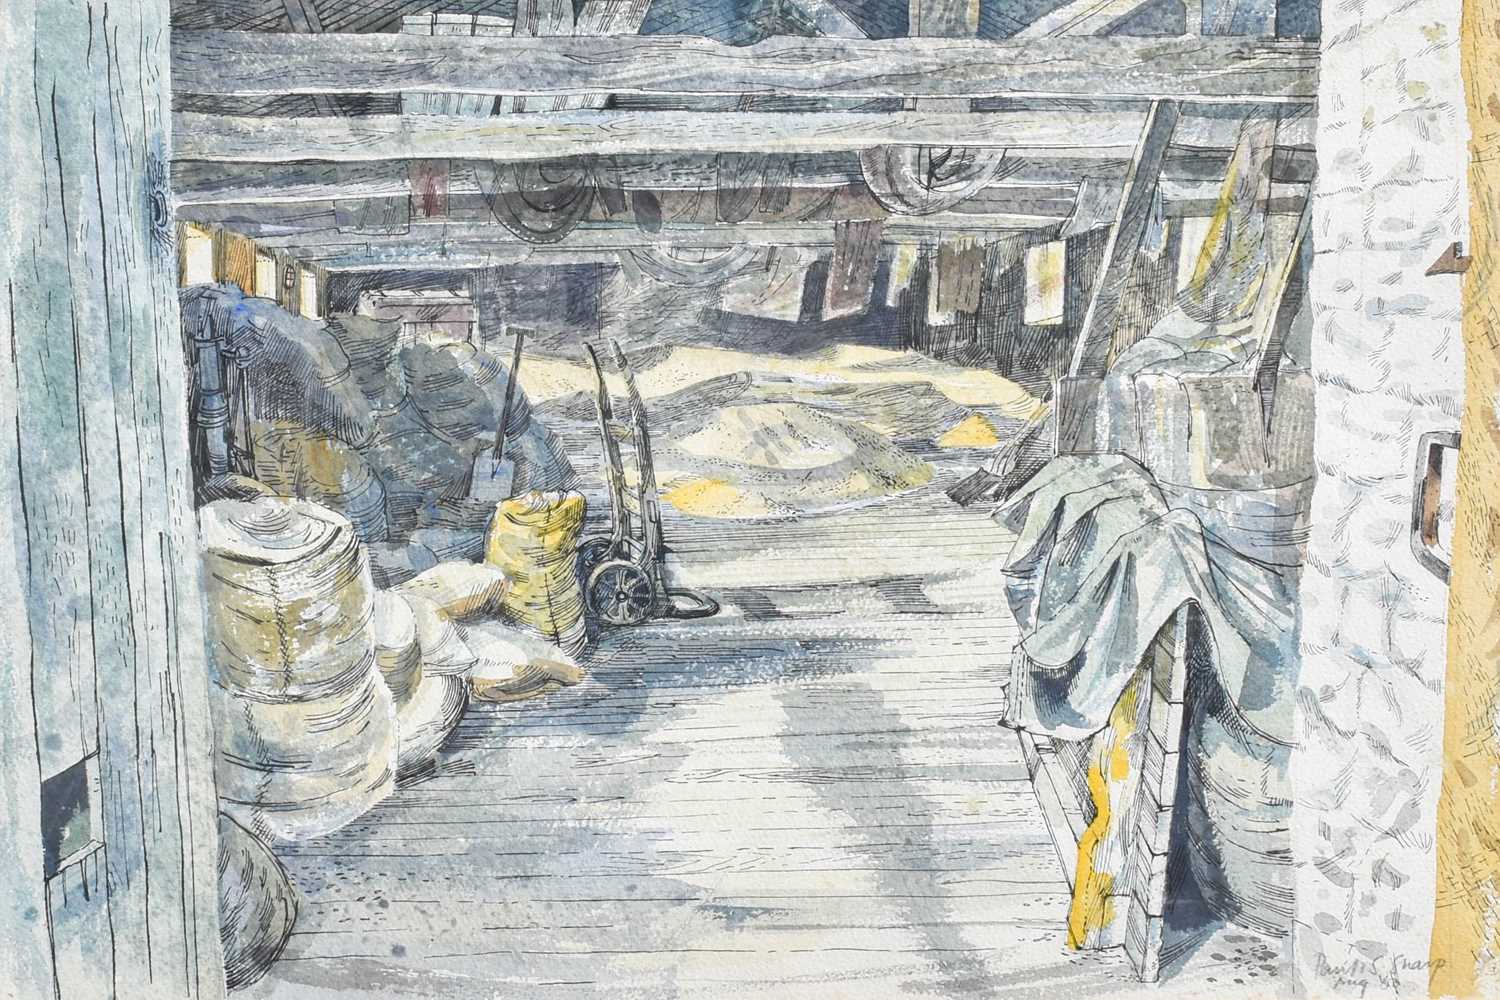 Paul S Sharp (20th Century) The storeroom Signed and dated August (19)88, pen and watercolour, 34.